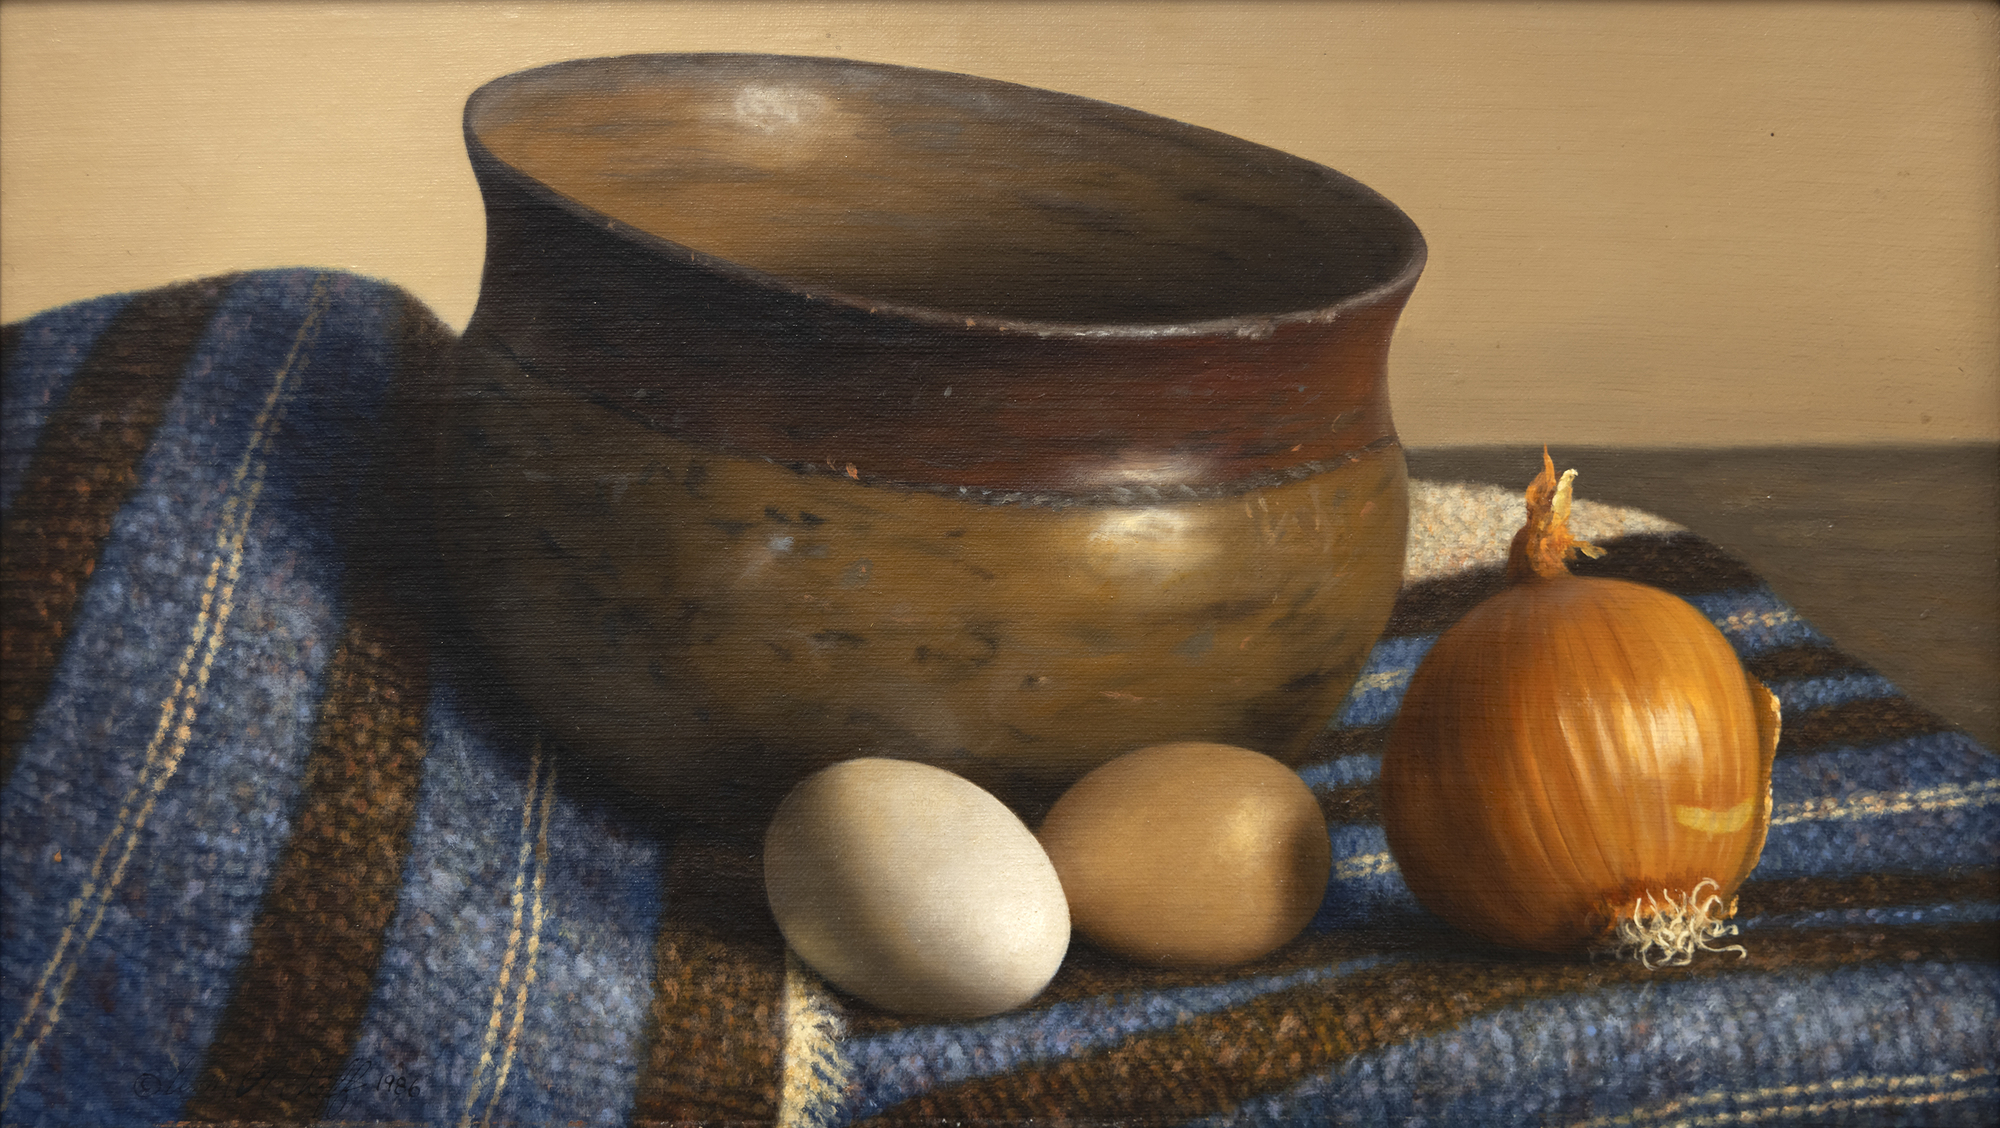 When William Acheff painted his first centuries-old Pueblo pot shortly after arriving in Taos in 1973, he realized he could evoke the deep quiet he imagined earlier artists felt working in their time. Though the artist has no direct link to the Southwestern and Plains tribes whose artifacts he has collected and painted, he seeks to extend an appreciation for Native American traditions, human qualities of continuity, and a slower pace of life as well as what he calls, &quot;the subtle relationships that are common to us all.&quot; Archeff was born in 1947 in Anchorage, Alaska, of Georgian, Russian, Scottish, Dutch, and Alaskan-Athabascan heritage. Classically trained in San Francisco, he continues to paint in this widely recognized, distinctive way, often blending artifacts and traditions of the past with contemporary items and settings. &lt;br&gt;&lt;br&gt;The bowl depicted in the present example is from San Juan, a pueblo rich in a tradition of creating pottery vessels for functional use. Though the early elegant shapes and beautiful curves ended by the 1900s, they were revived in the 1930s and 1940s when local women studied ancient pottery from the area as a basis for a bowl such as the one depicted here. Rather than &quot;San Juan,&quot; the native people prefer the traditional name Ohkay Owingeh which means &quot;Place of the Strong People.&quot;